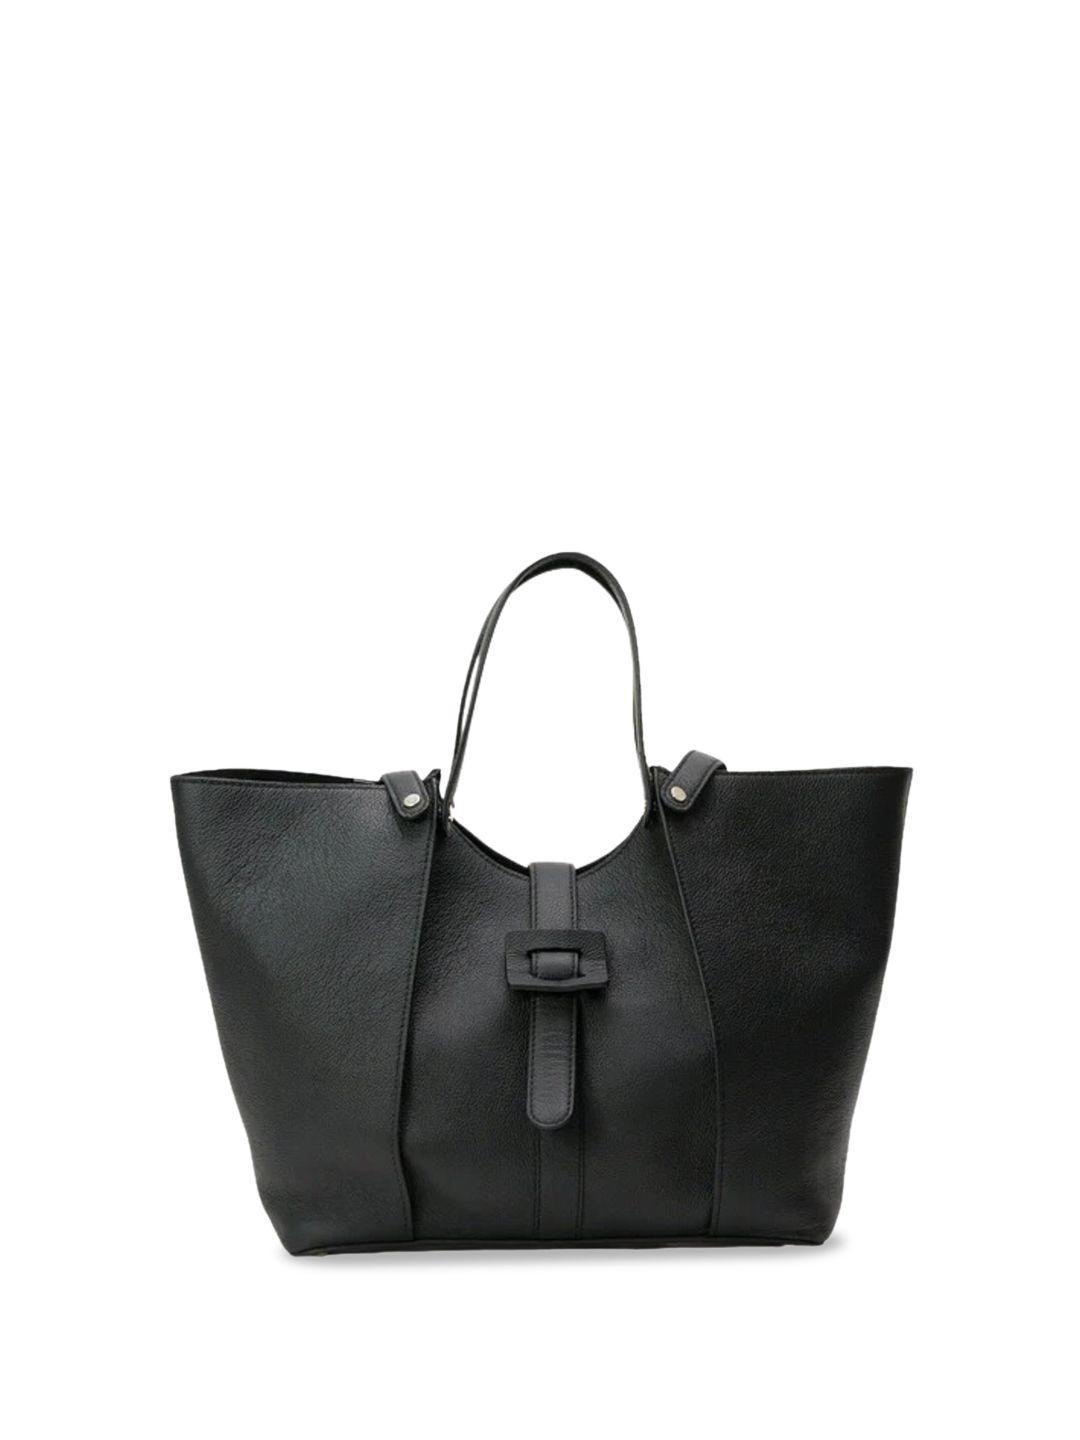 mistry textured oversized structured leather handheld bag